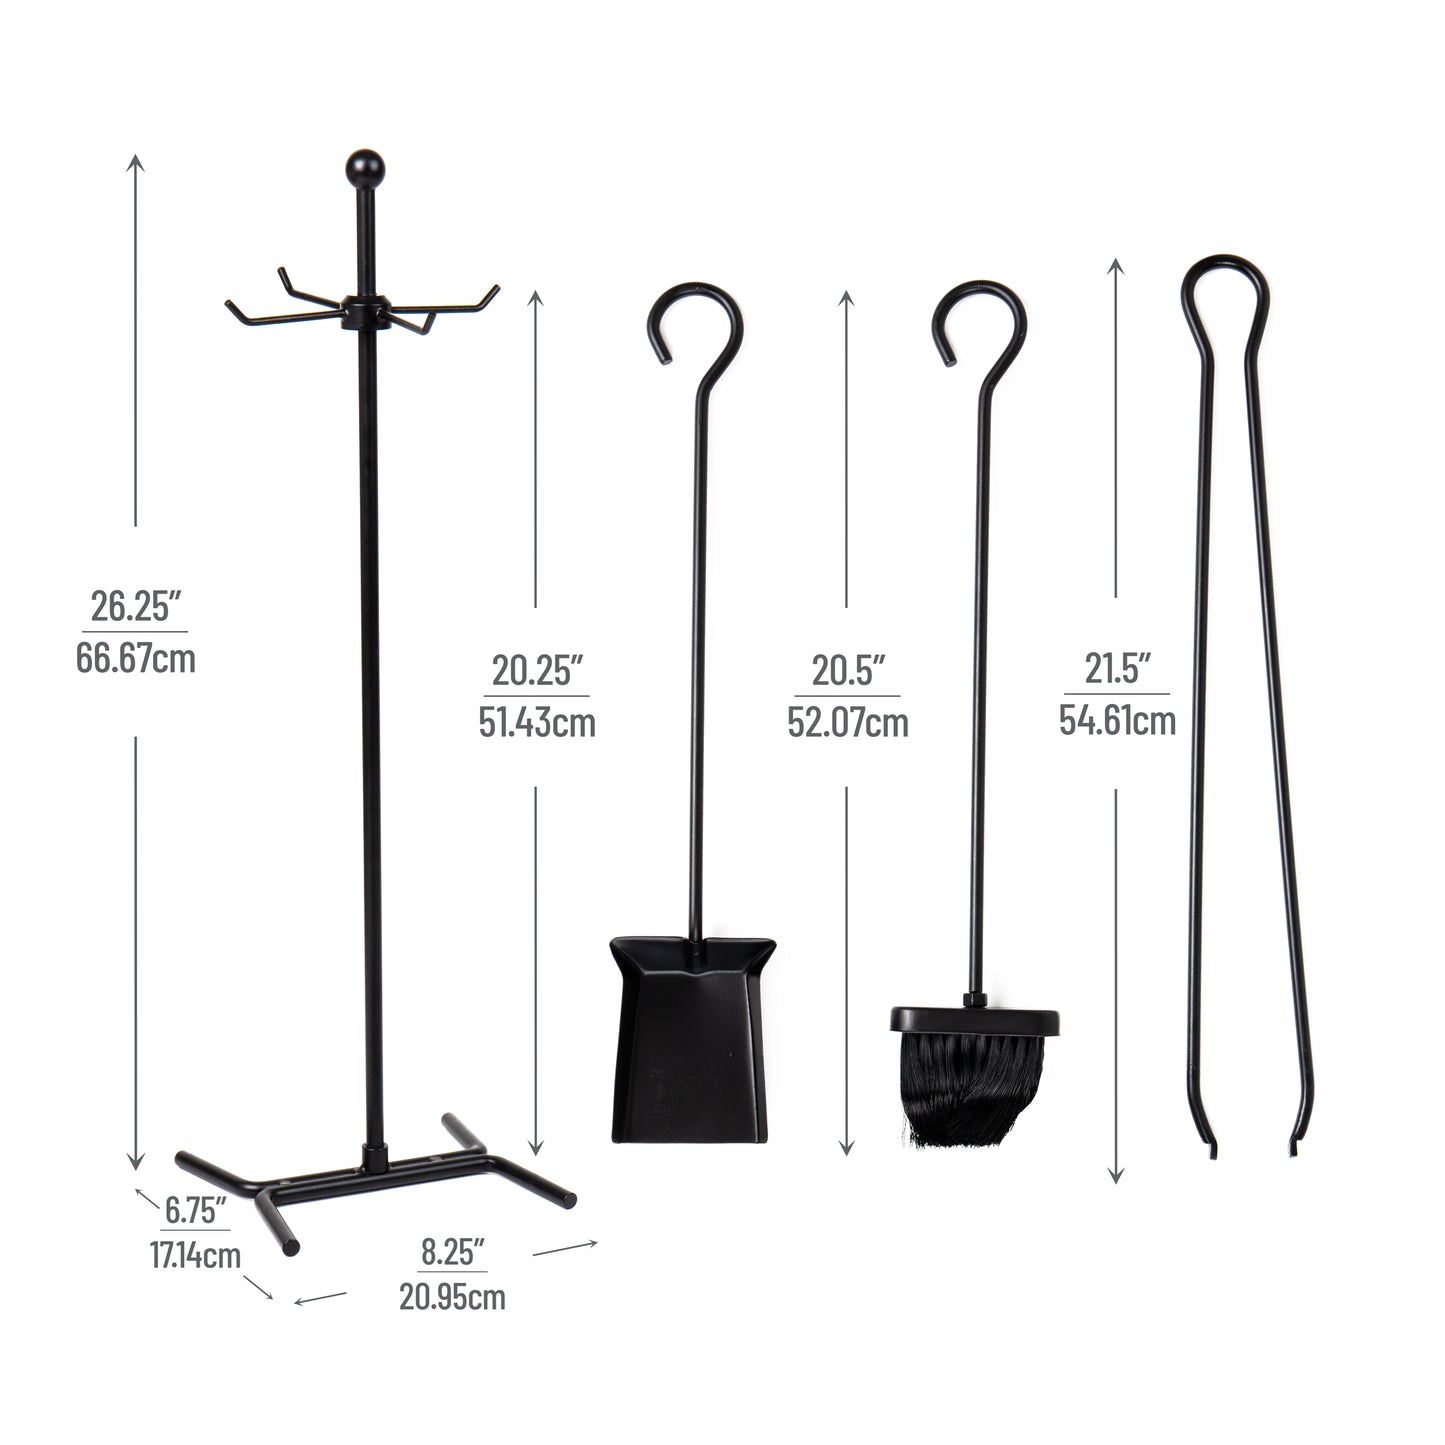 Mind Reader Fireplace Set with Stand, Brush, Shovel Scoop, Poker, Tongs, Steel, 8.25"L x 6.75"W x 26.25"H, 4 Pcs, Black